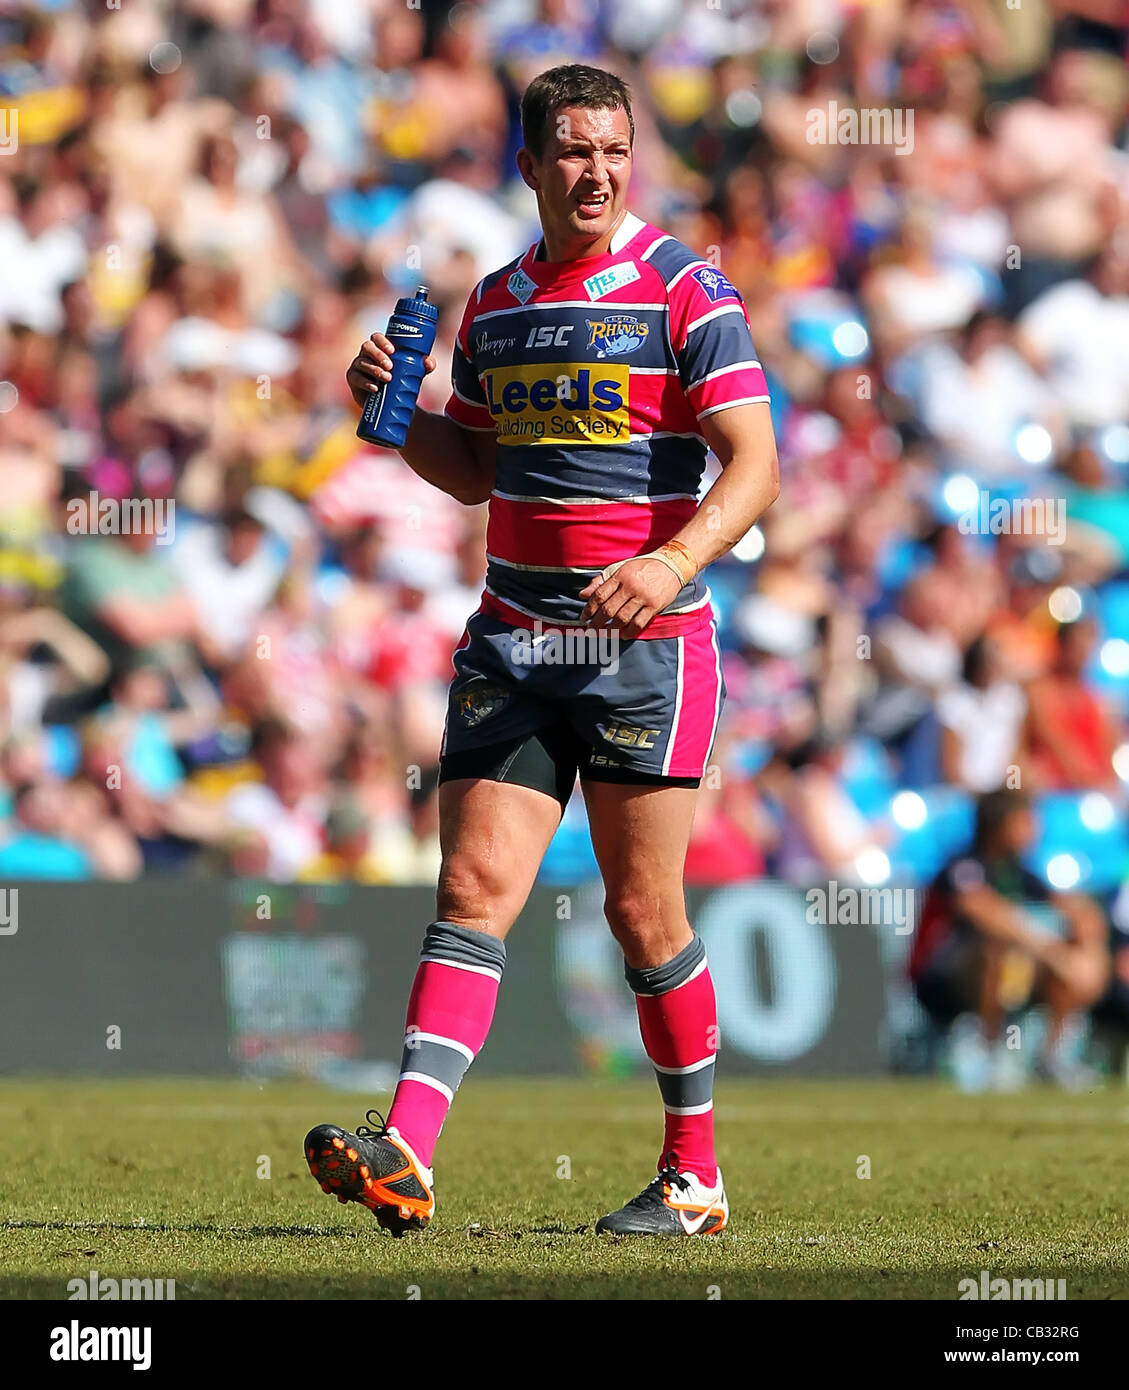 26.05.2012 Manchester, England. Bradford Bulls v Leeds Rhinos. Leeds Rhinos Stand Off Danny McGuire takes a water break from the action during the Stobart Super League Rugby Magic Weekend from the Etihad Stadium Stock Photo